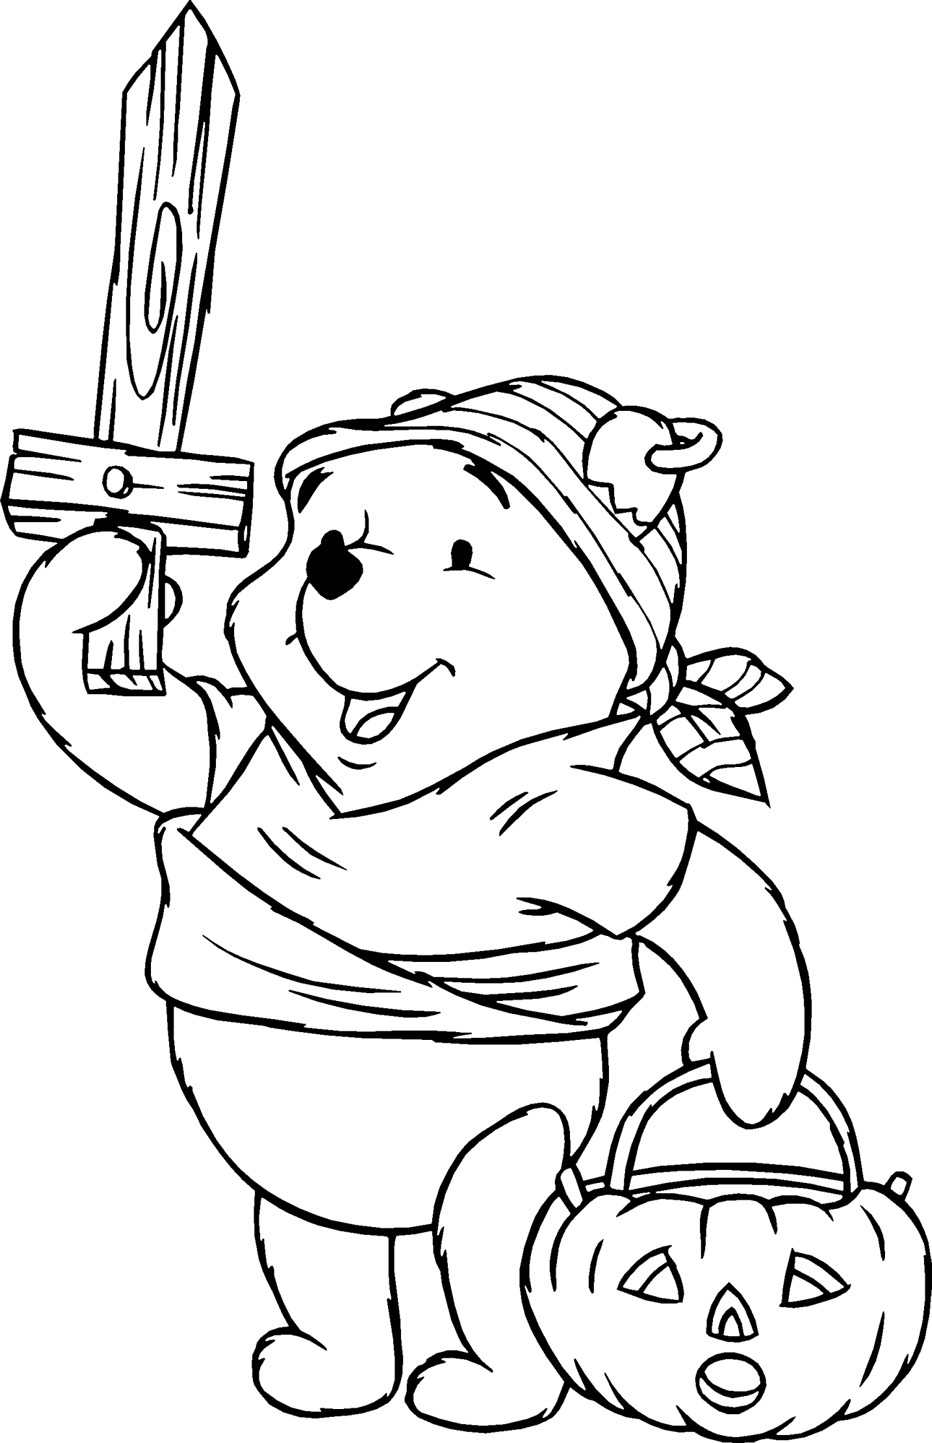 Disney Halloween Coloring Pages For Kids 3